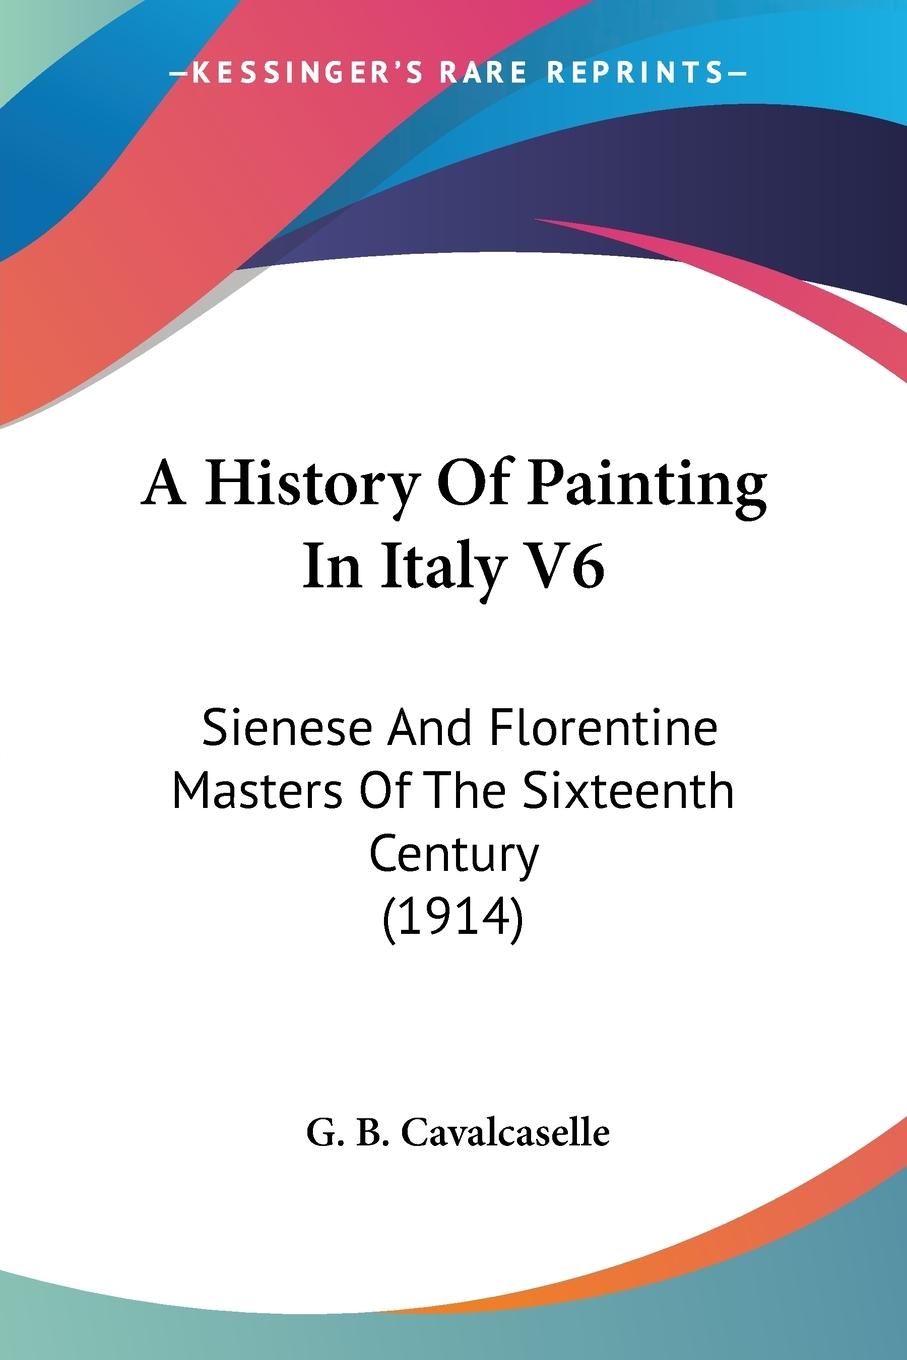 A History Of Painting In Italy V6 - Cavalcaselle, G. B.